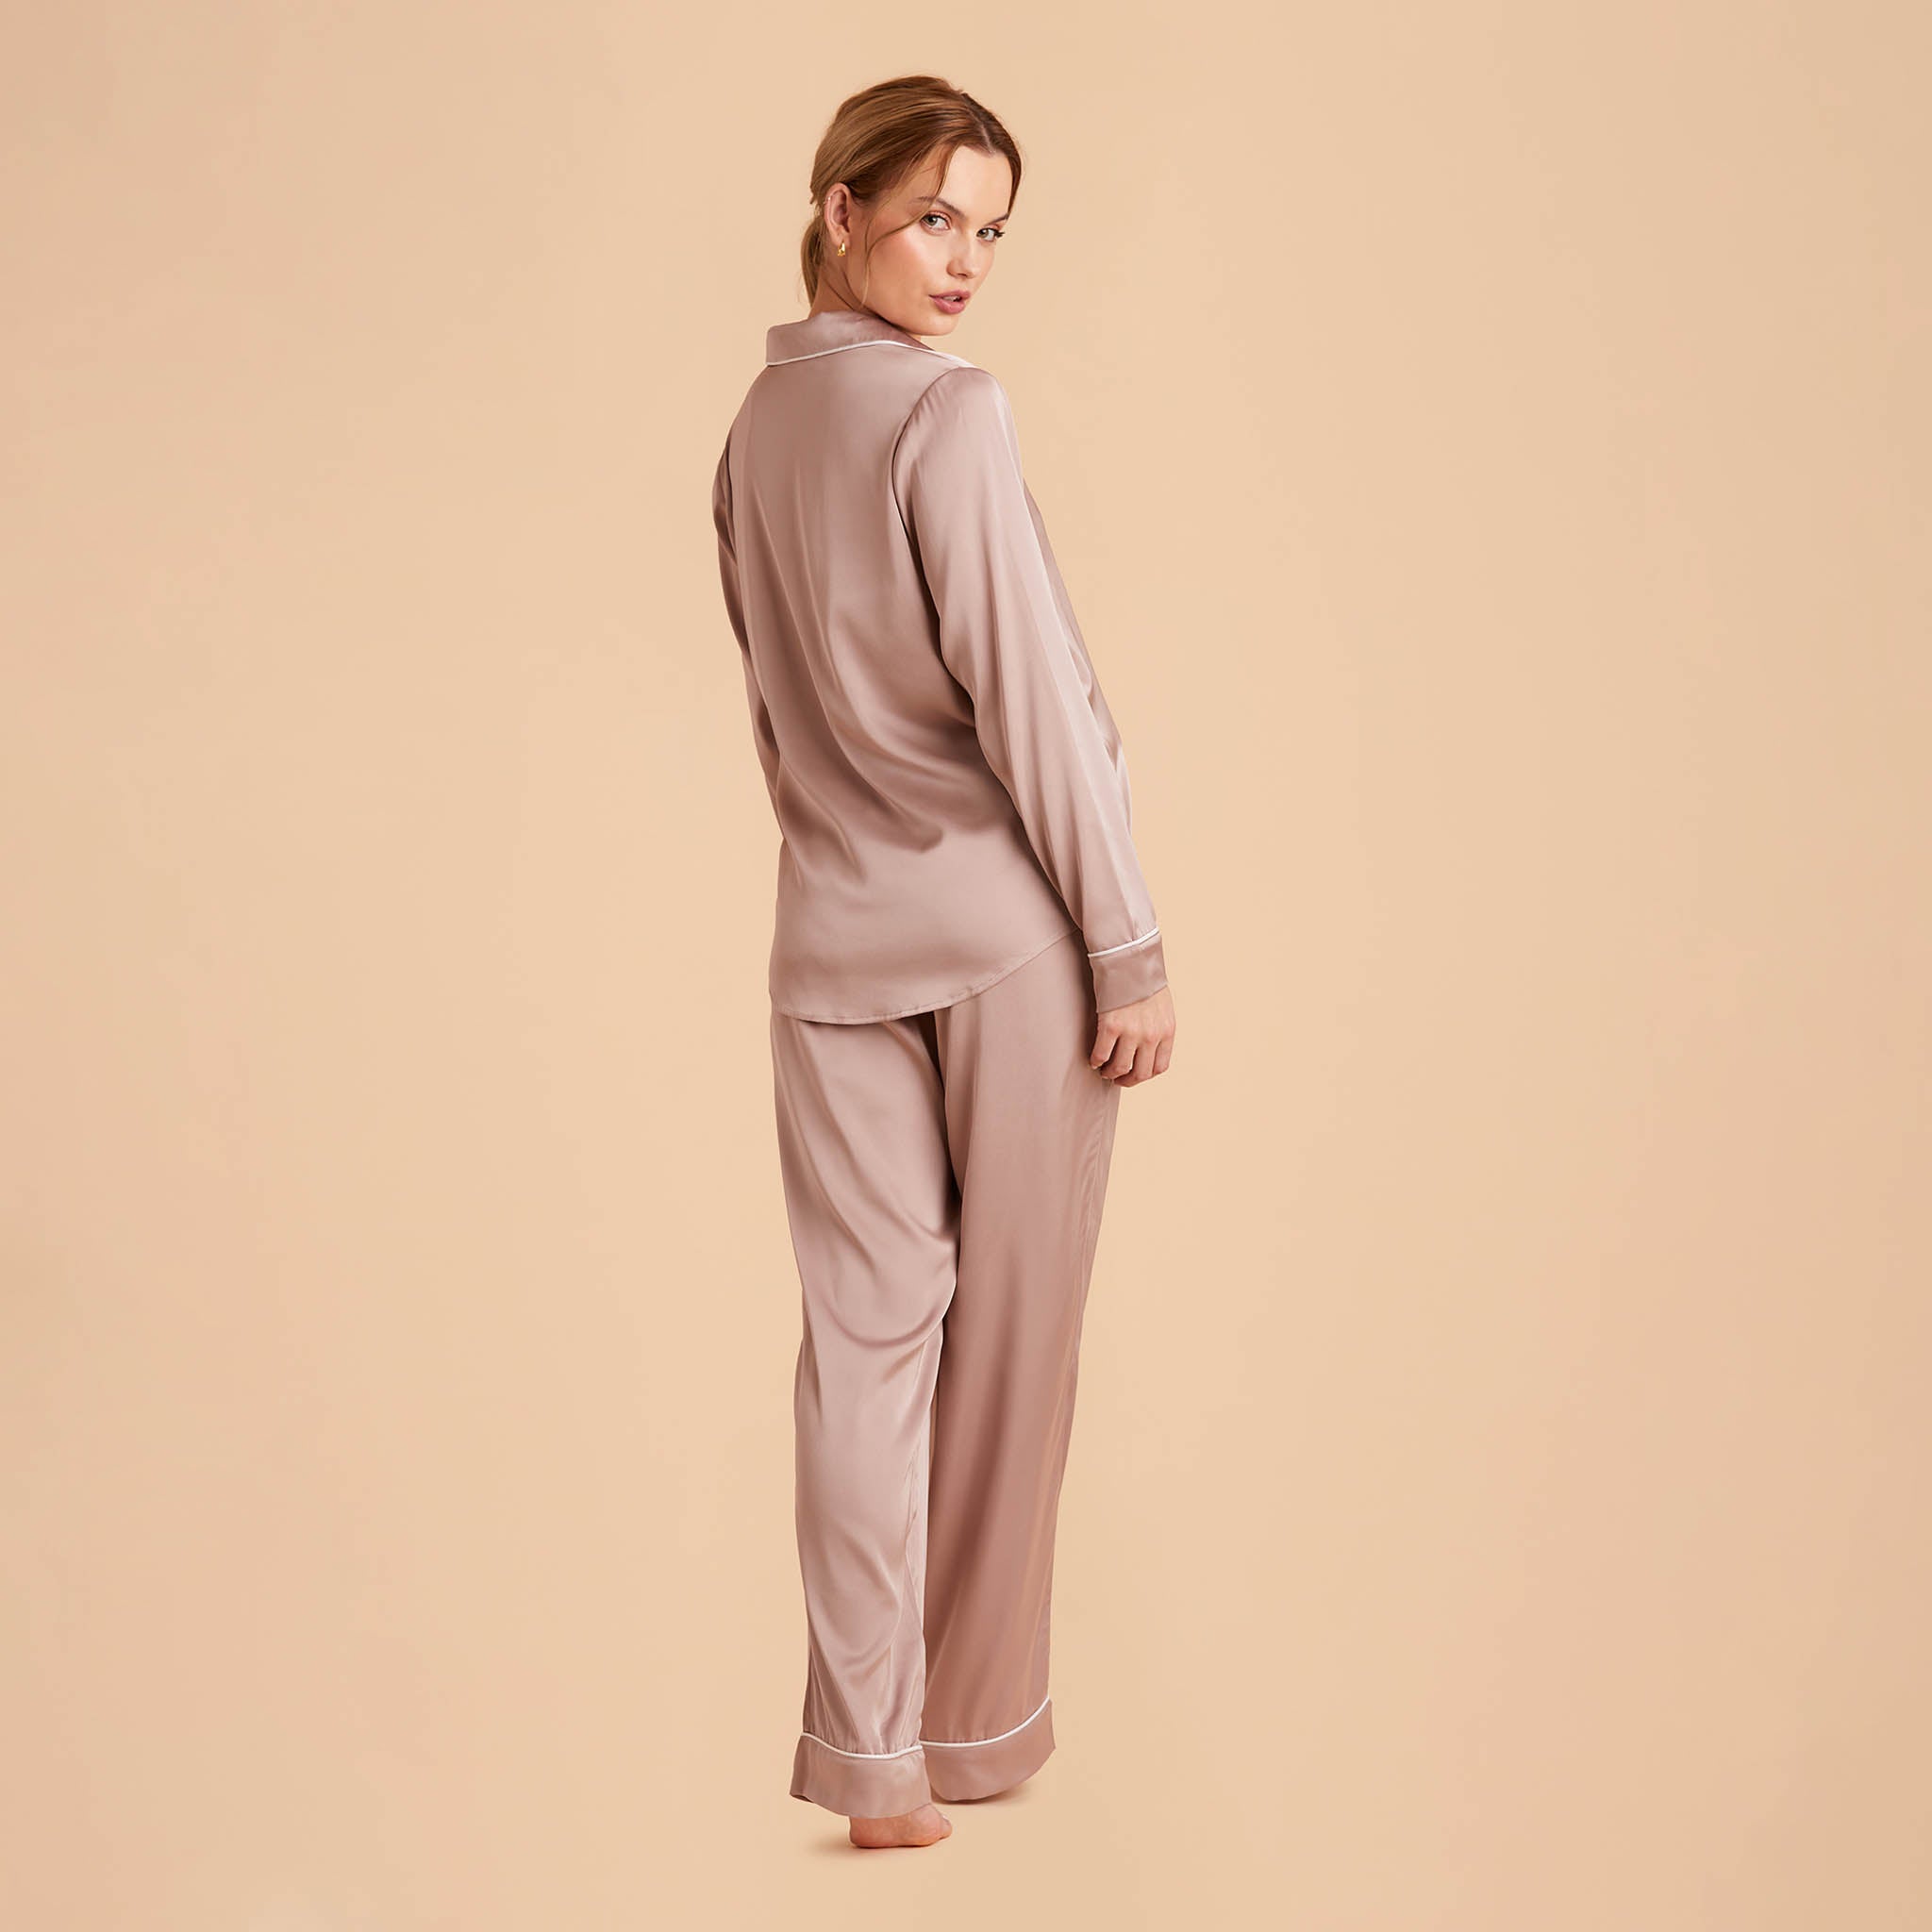 Jonny Satin Long Sleeve Pajama Top With White Piping in mauve taupe, side view